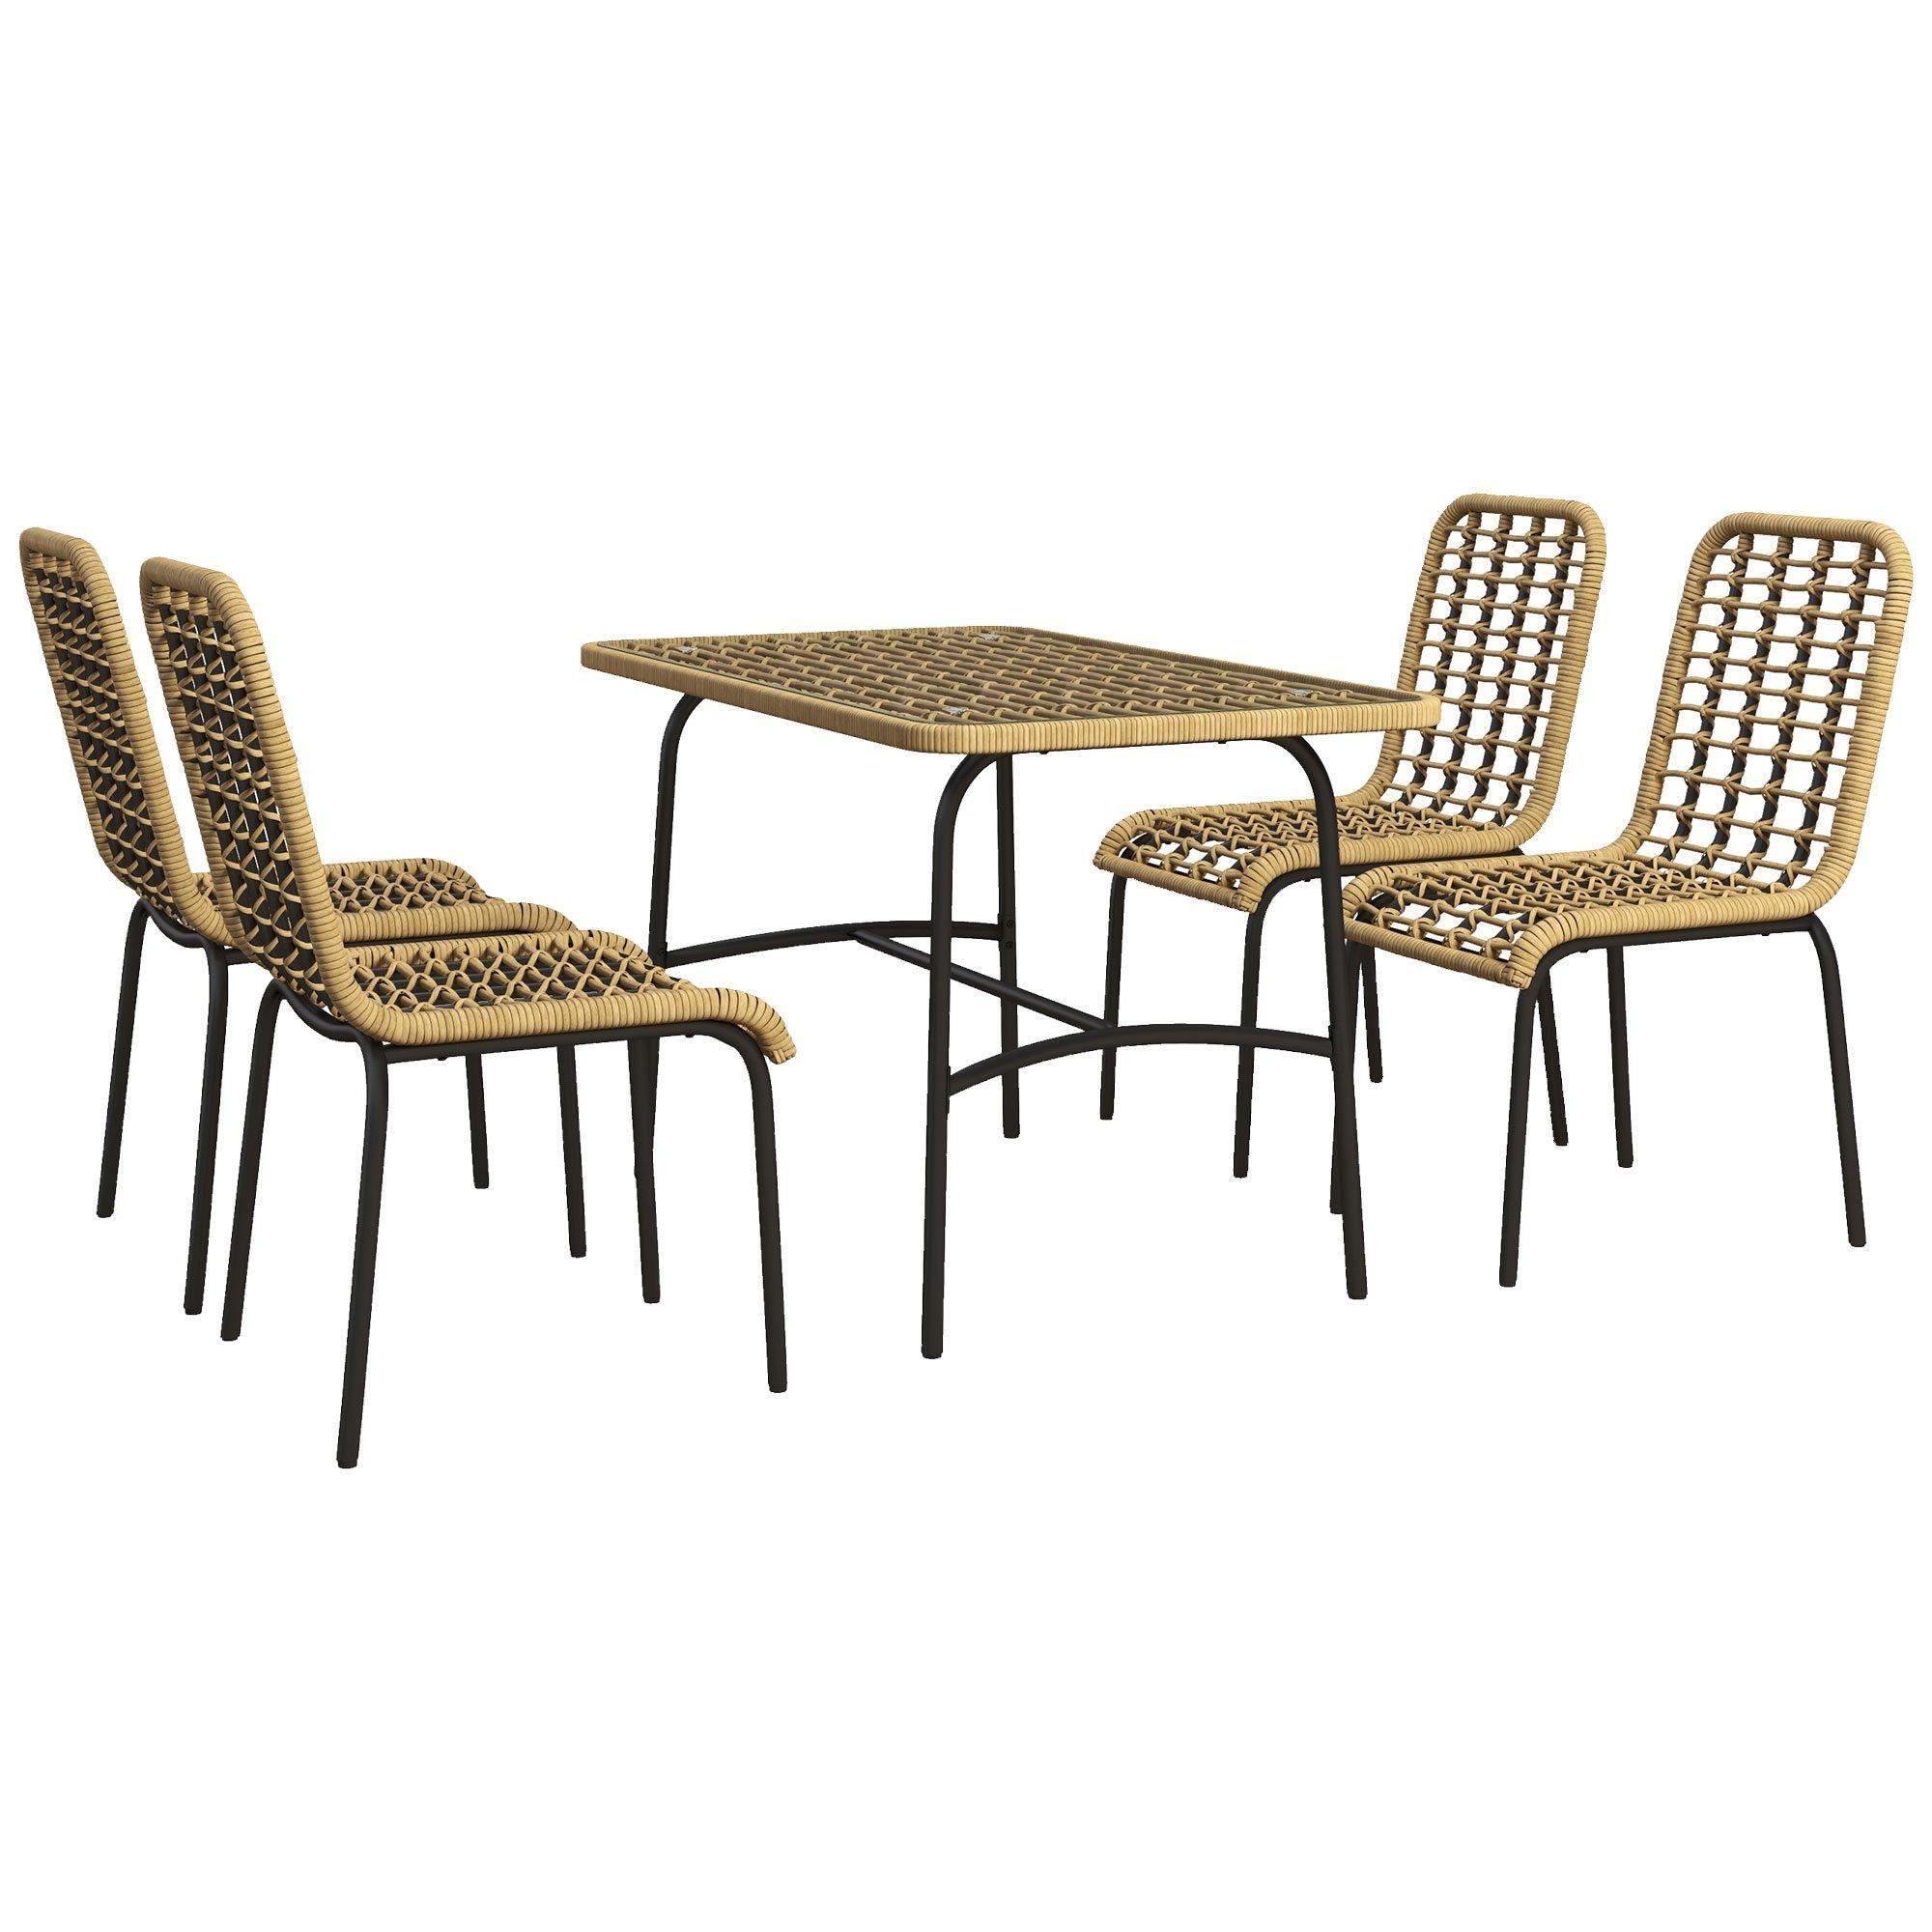 4 Seater Rattan Garden Furniture Set w/ Tempered Glass Tabletop - image 1